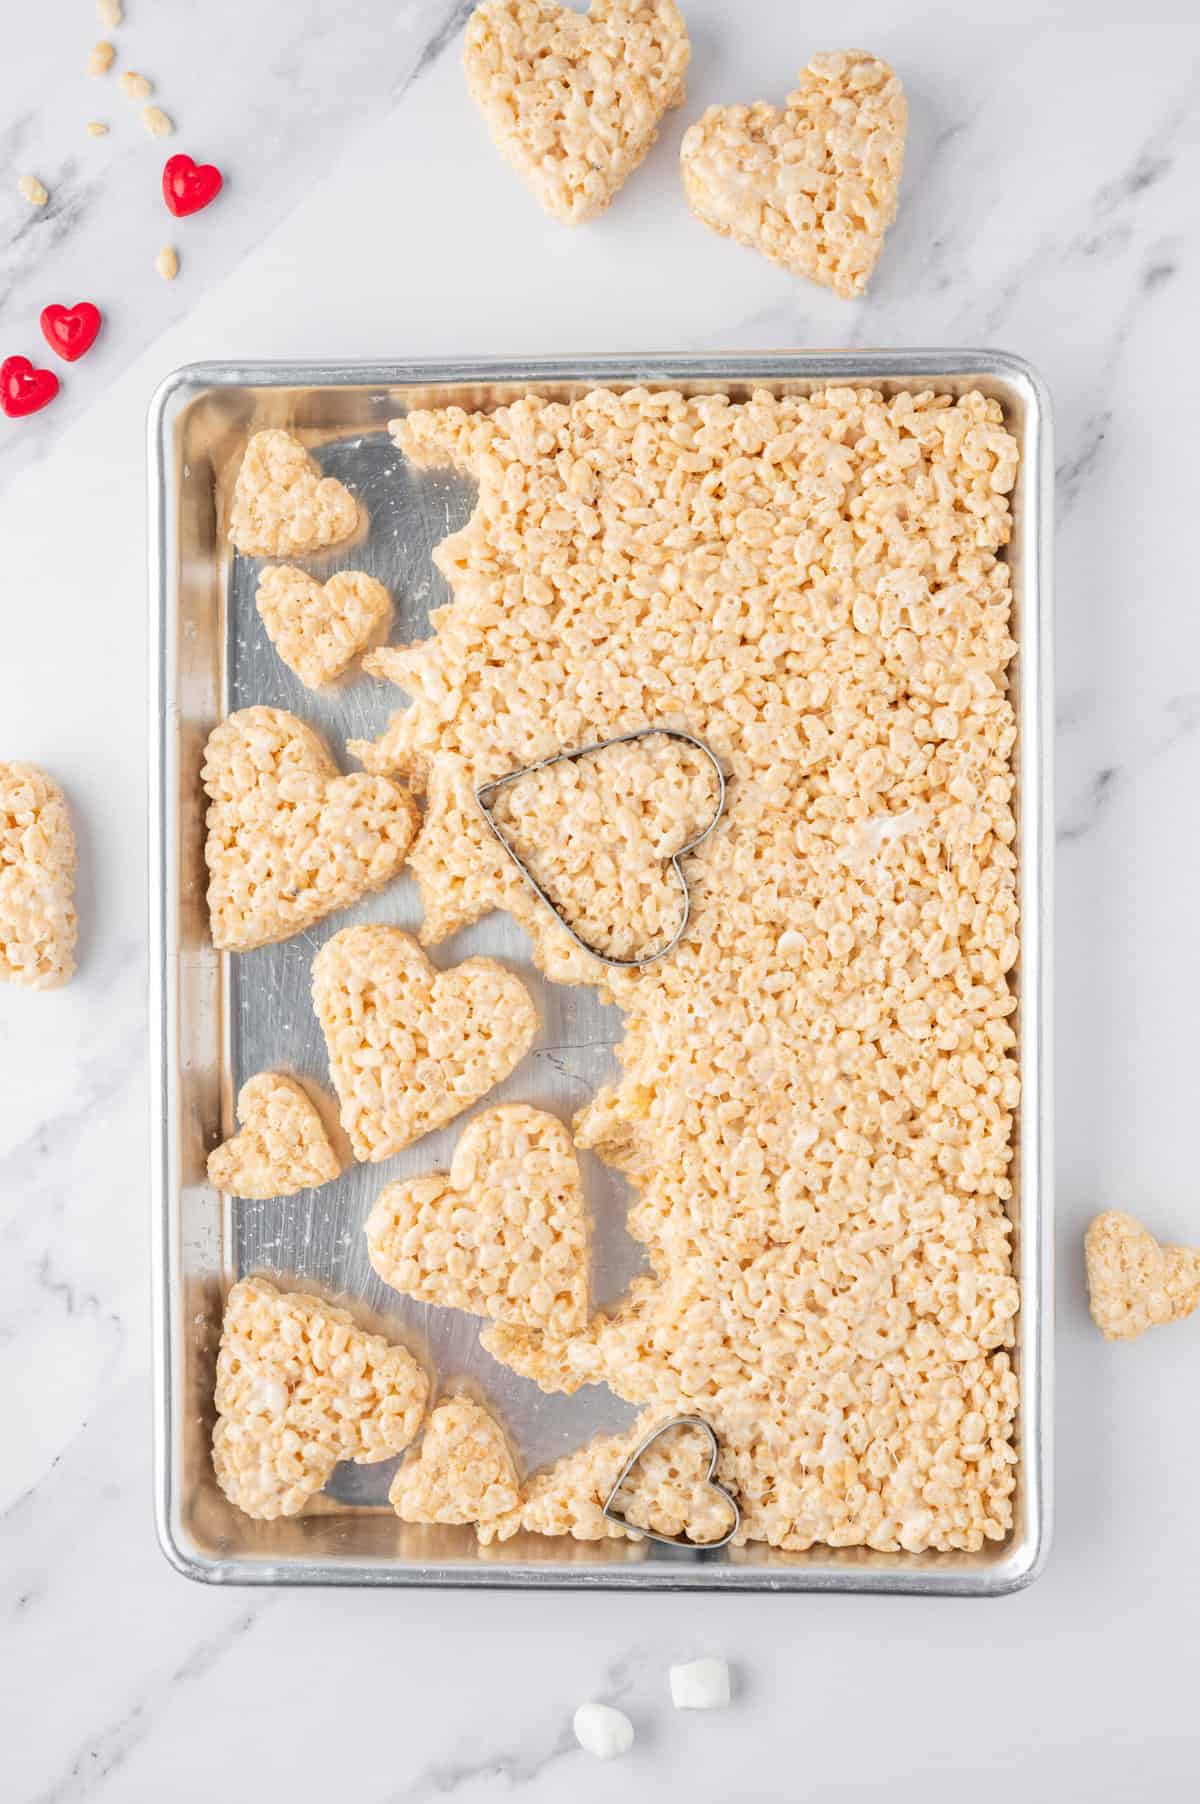 Using a heart shaped Cookie Cutter, cut apart the rice Krispies.